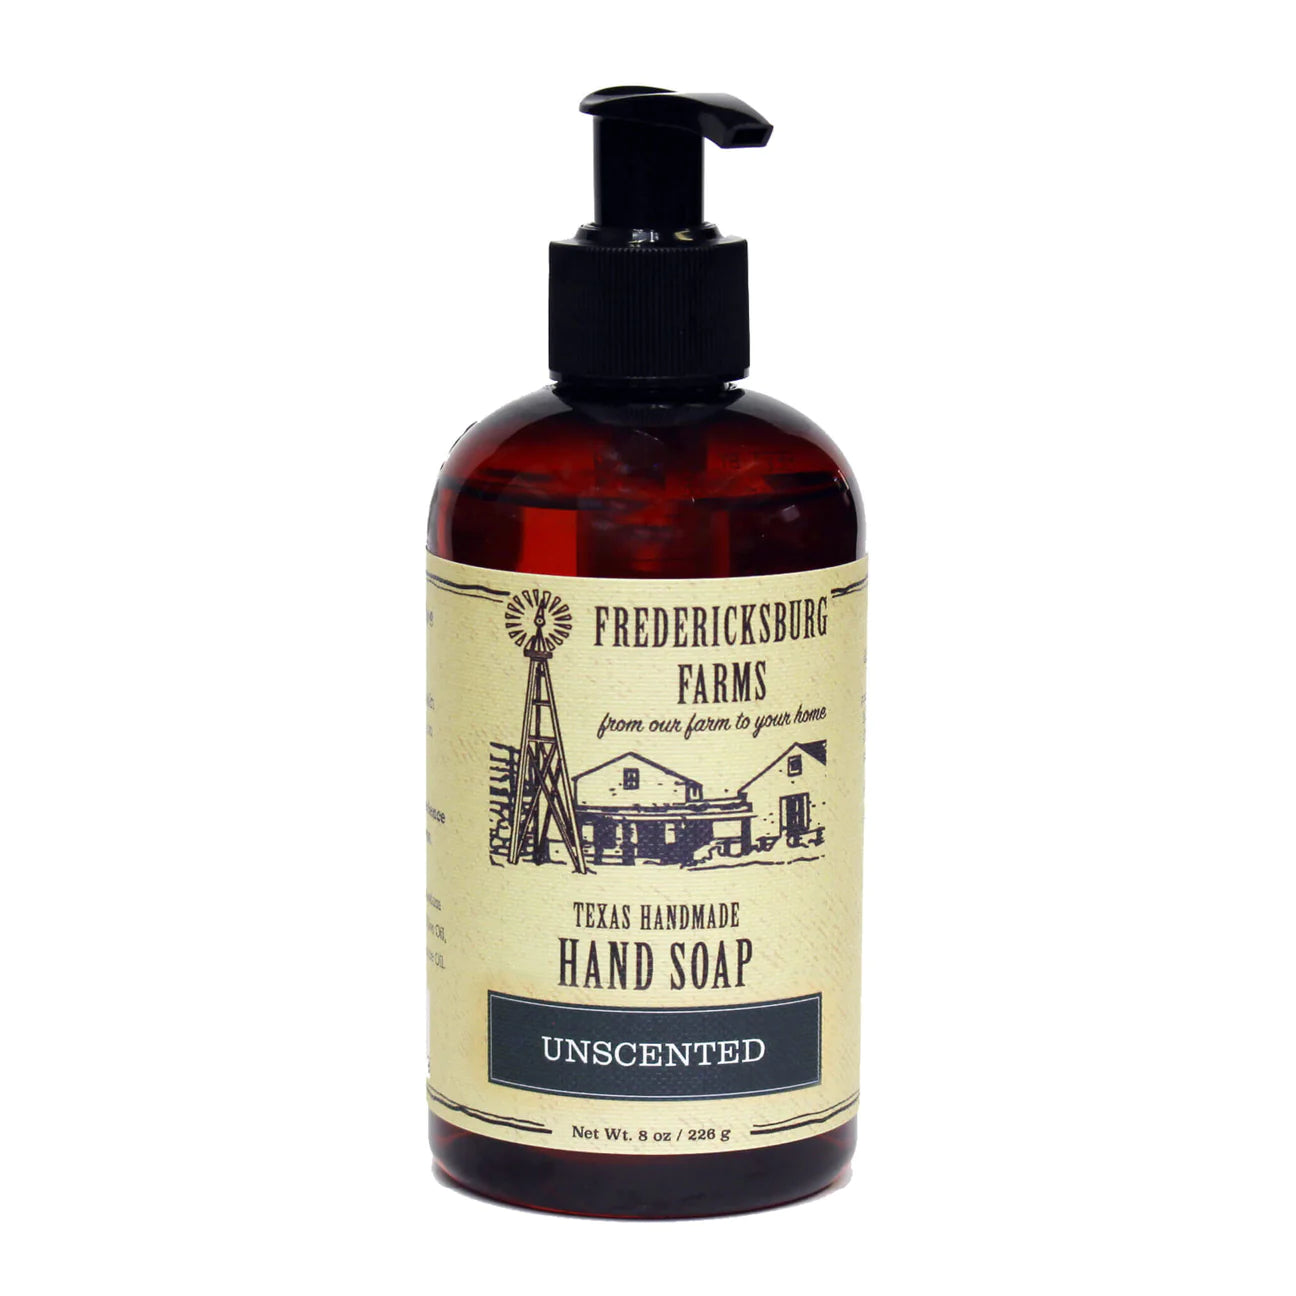 HAND SOAP - UNSCENTED